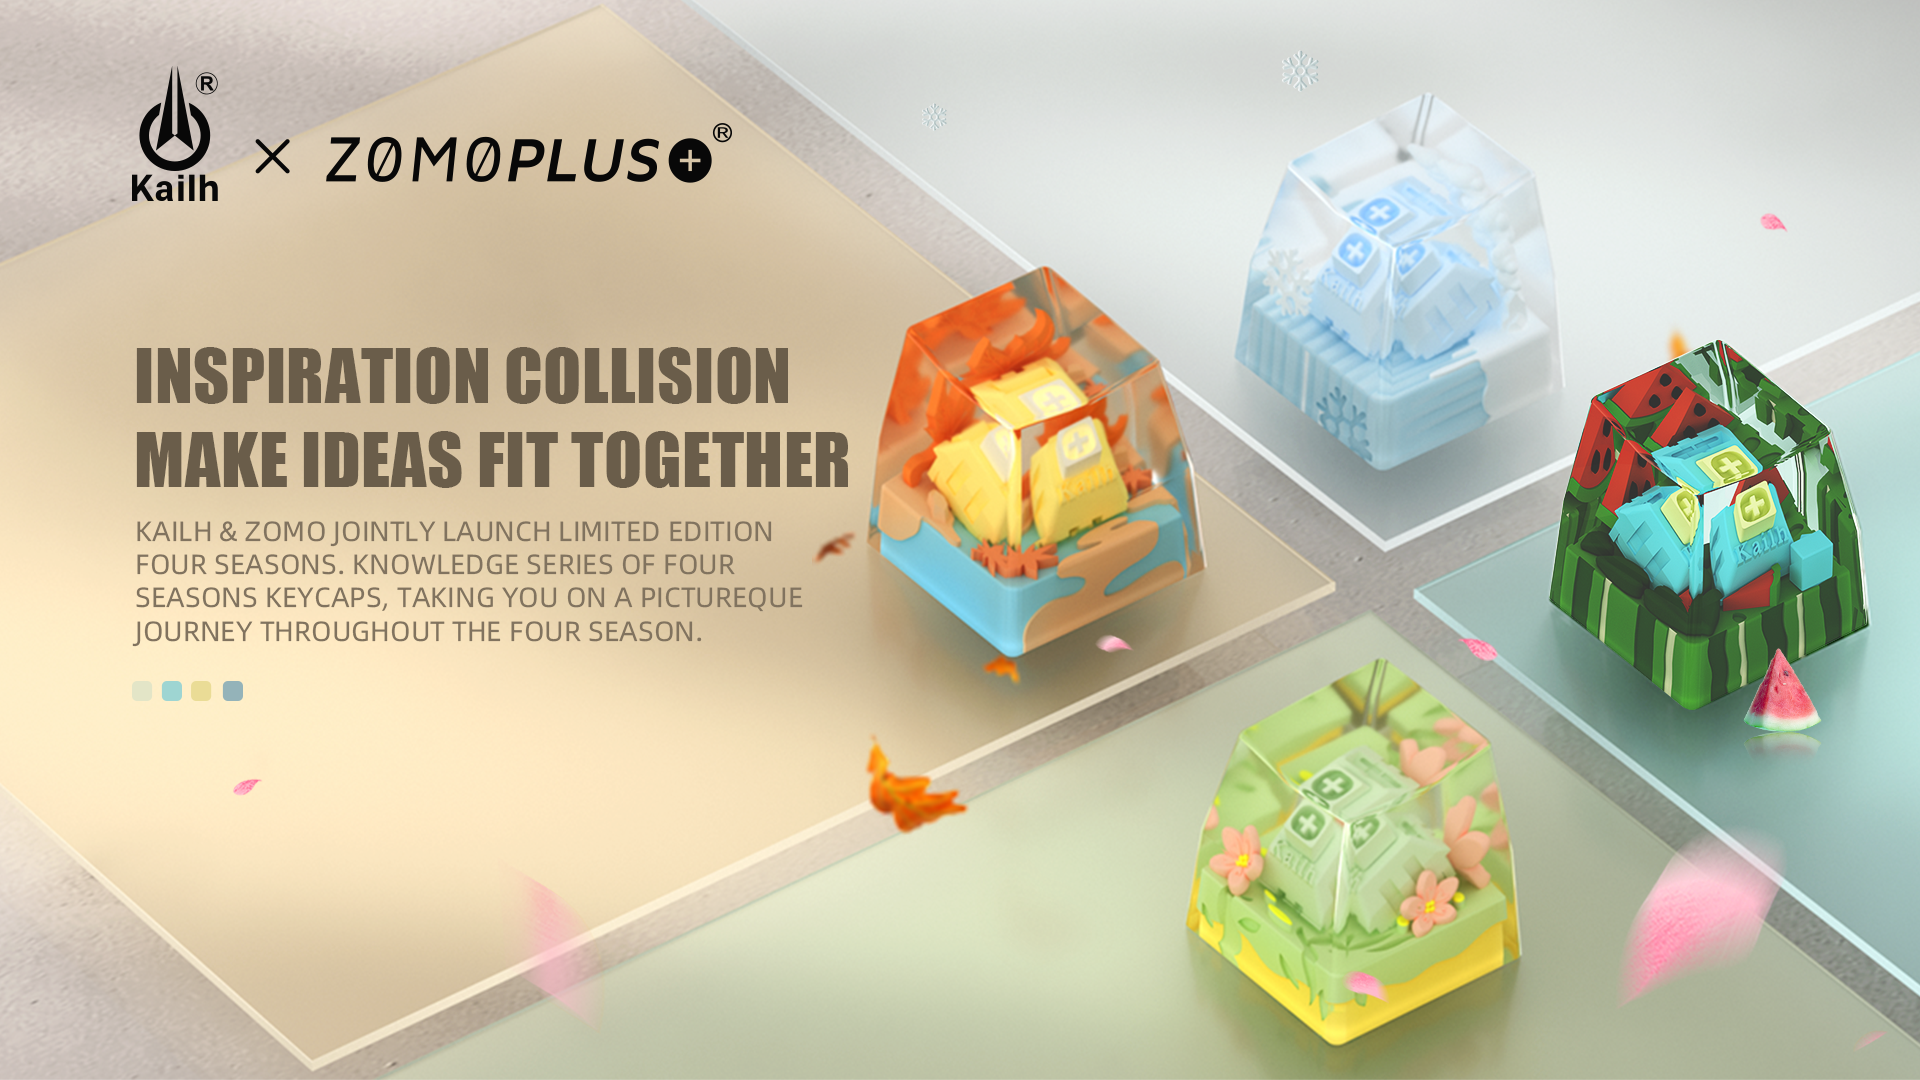 Inspiration collision, ideas coincide! Kailh & ZOMO Jointly Launch Limited Know Series Four Seasons Keycaps